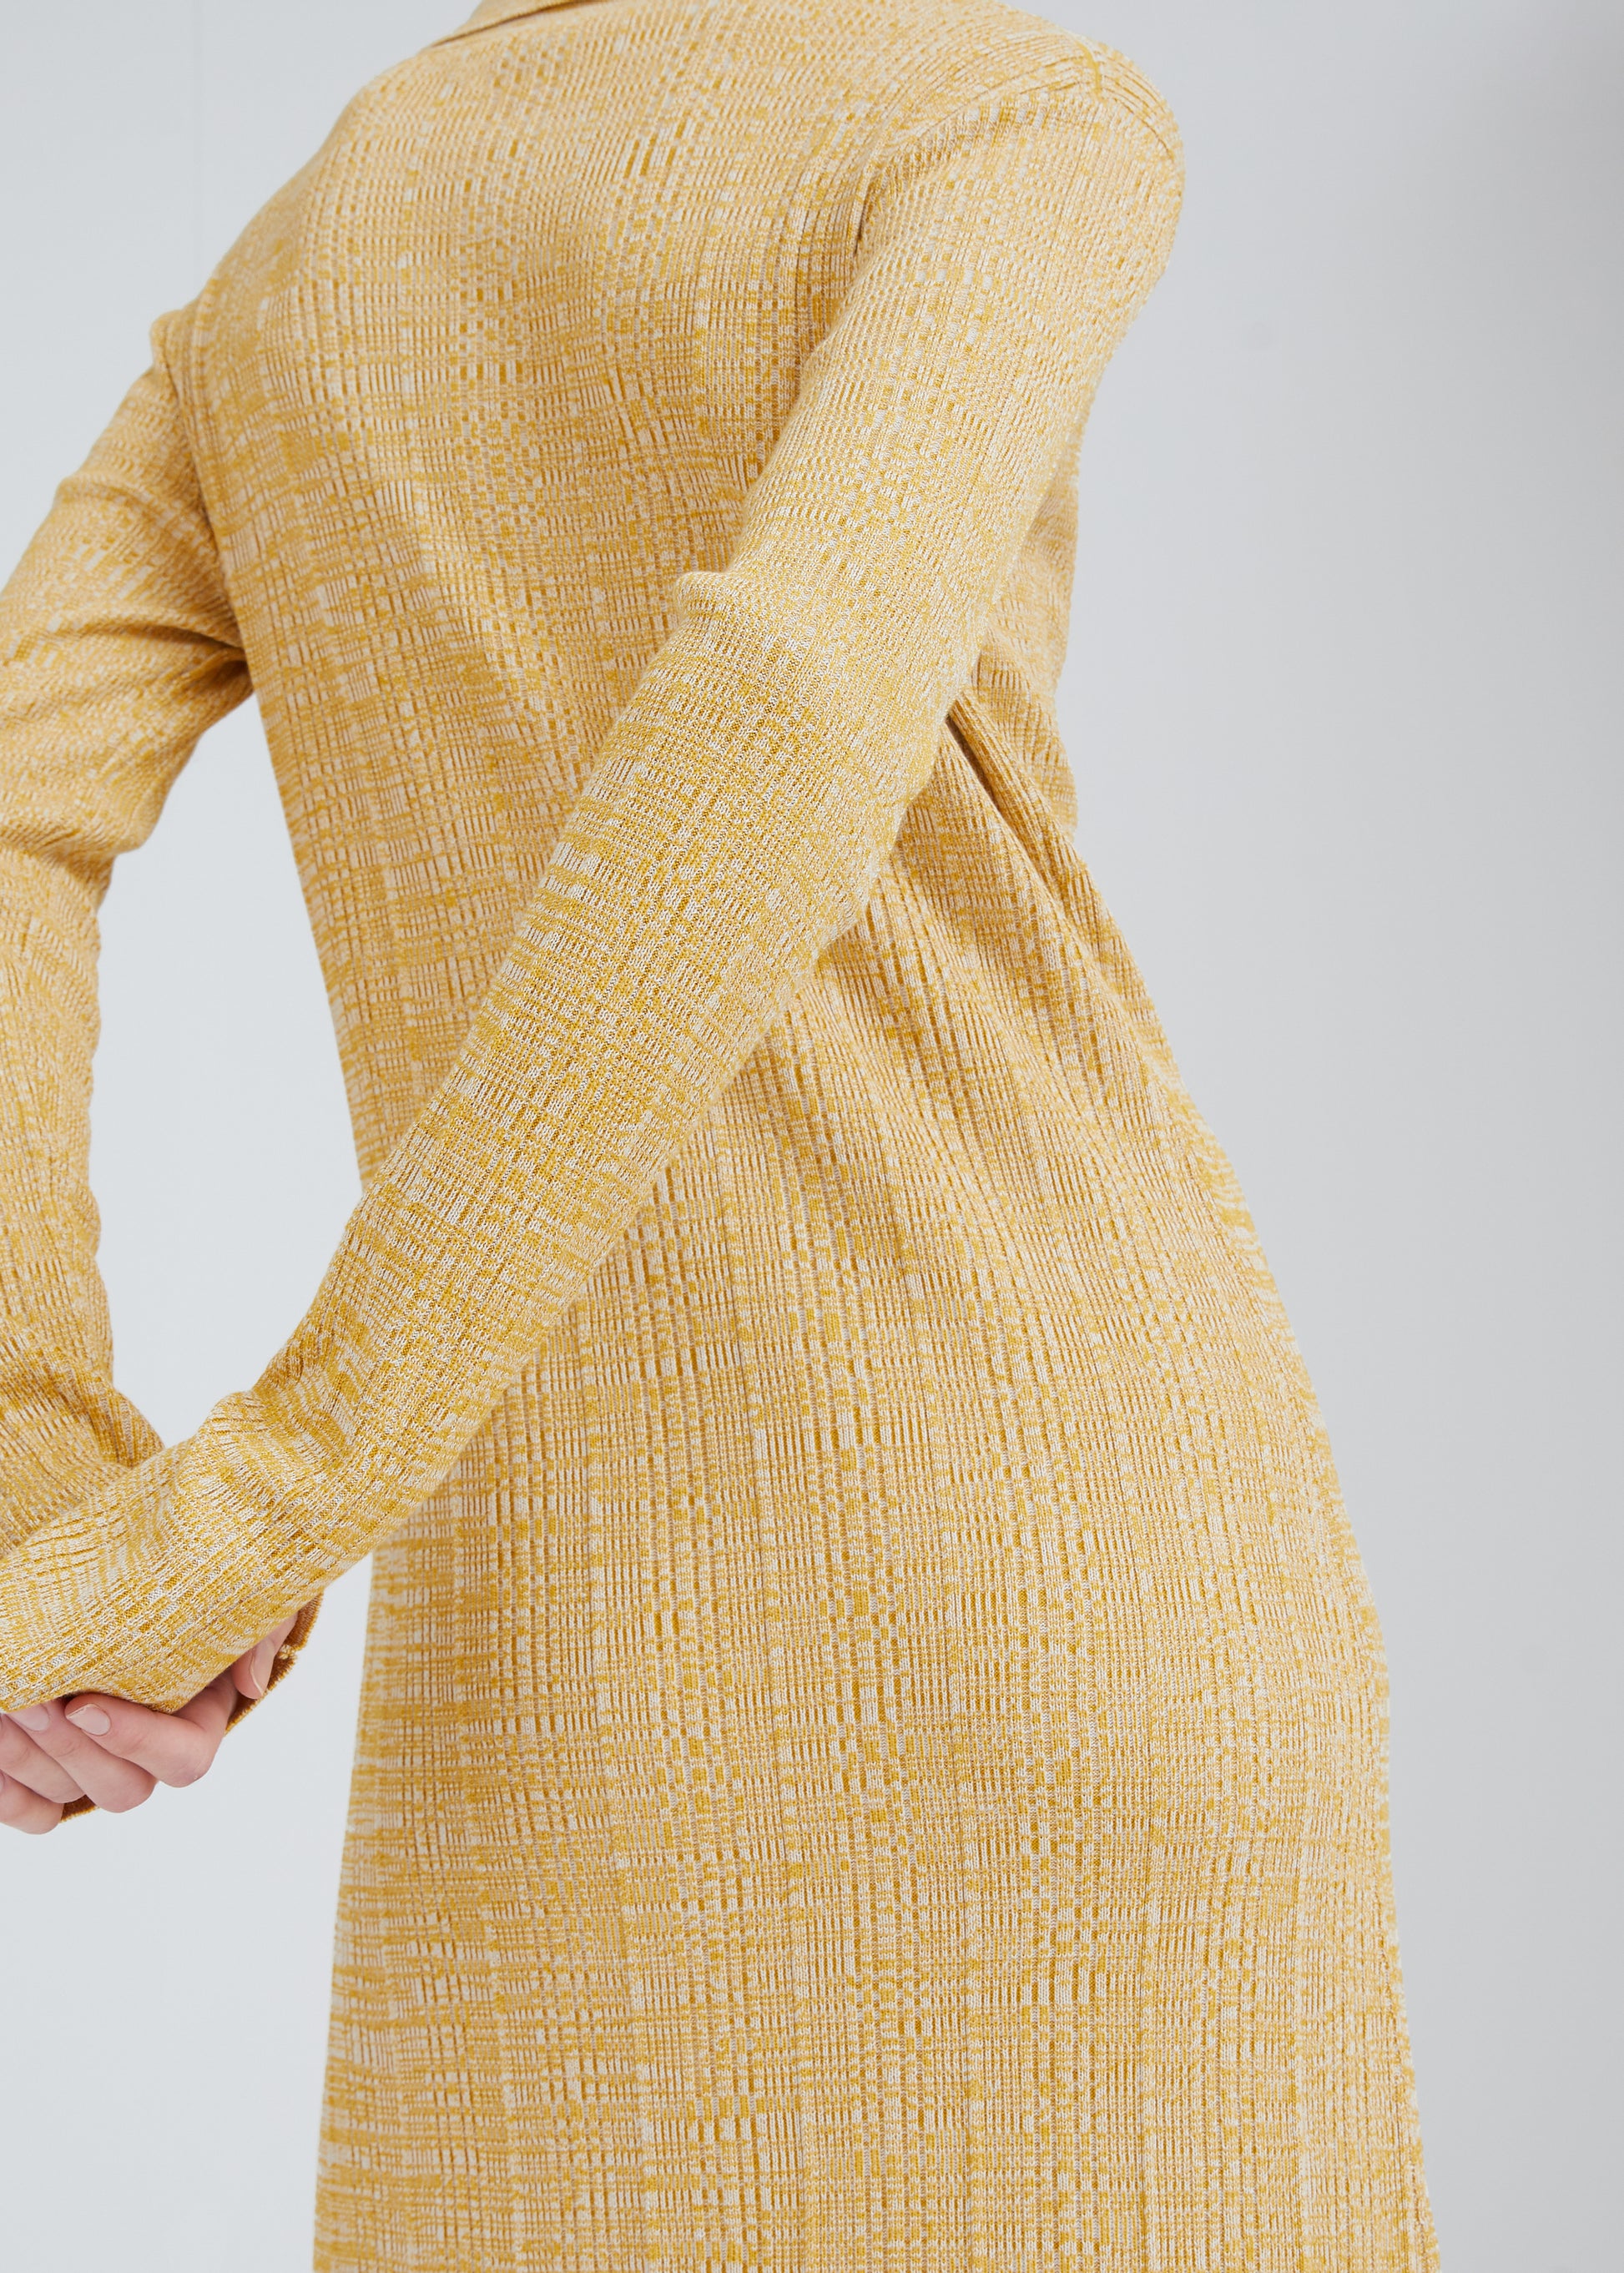 Issue Twelve button up long dress in yellow silk and cotton